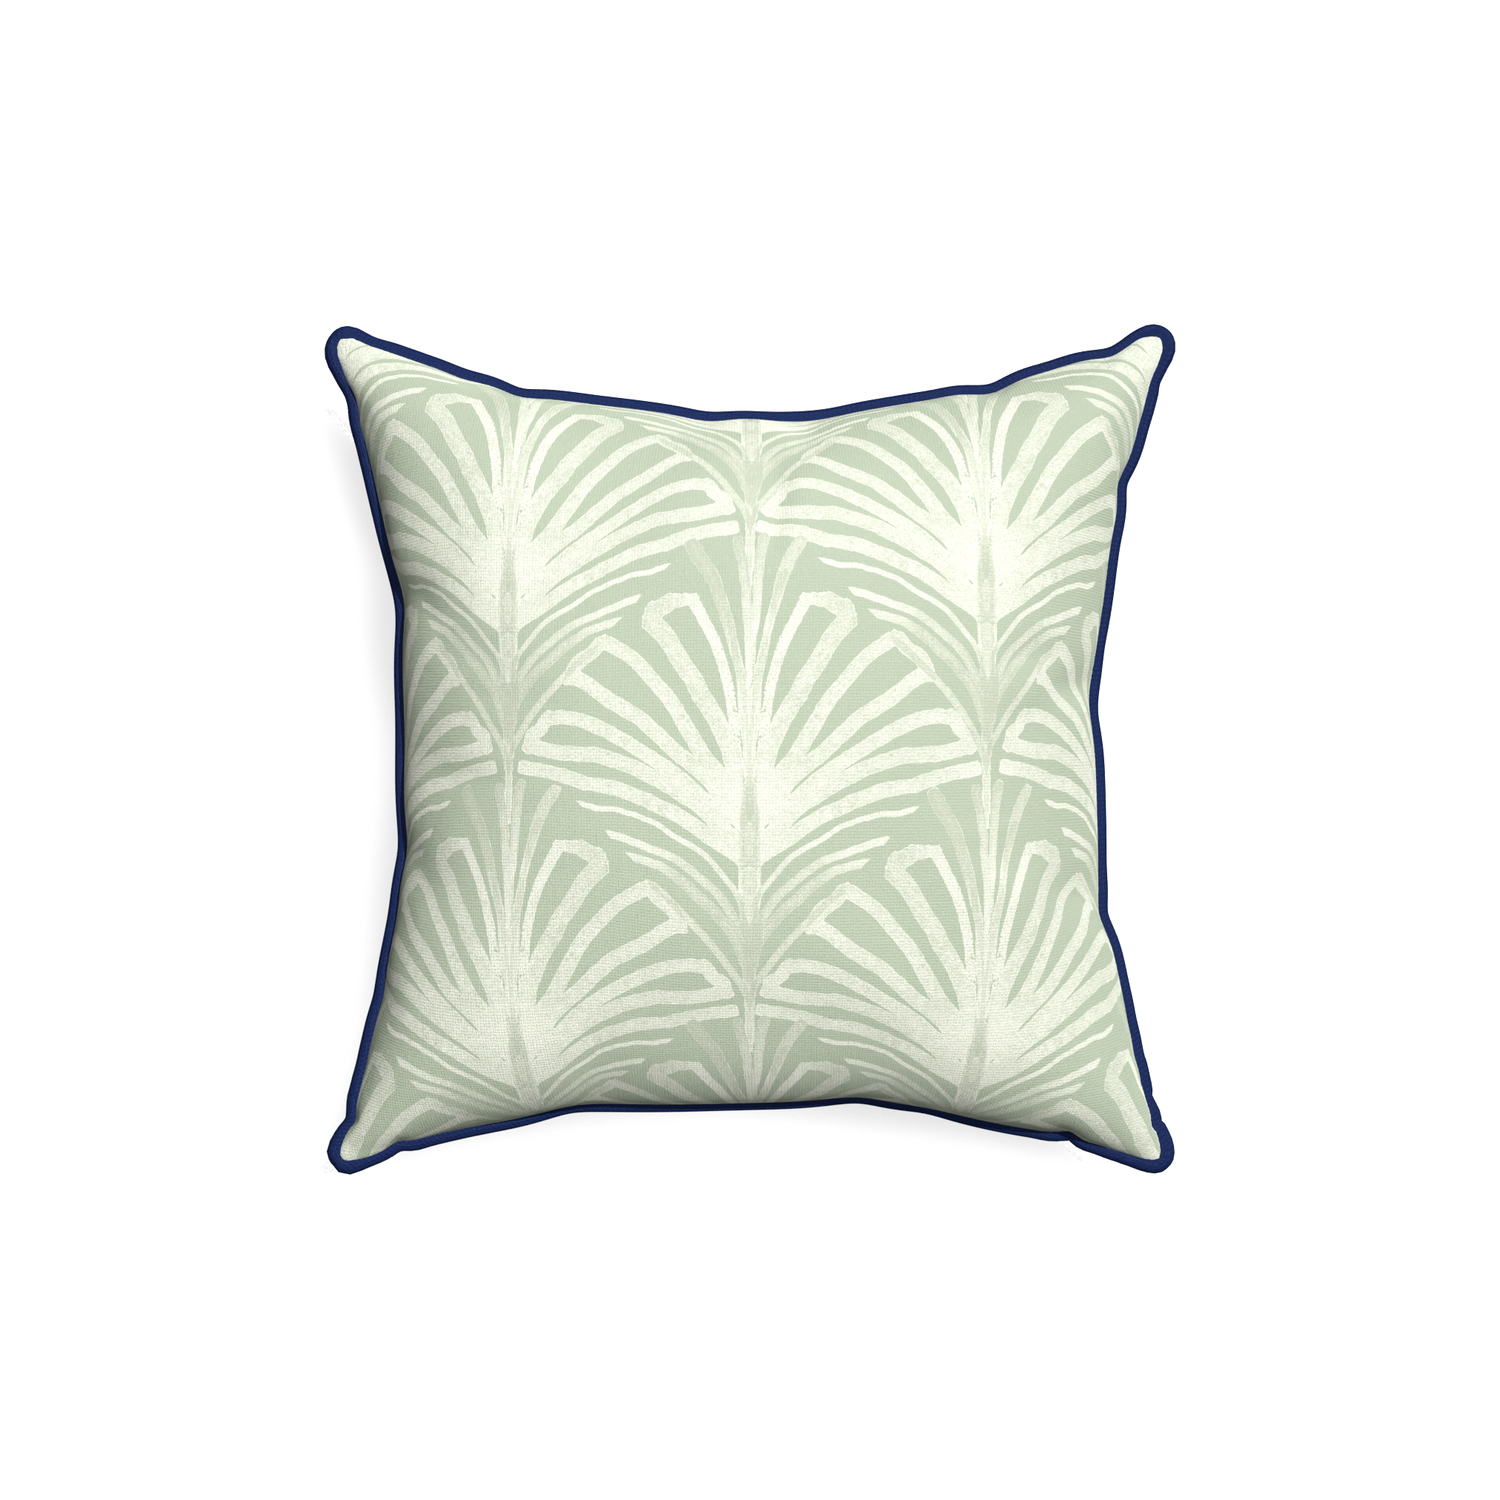 18-square suzy sage custom pillow with midnight piping on white background